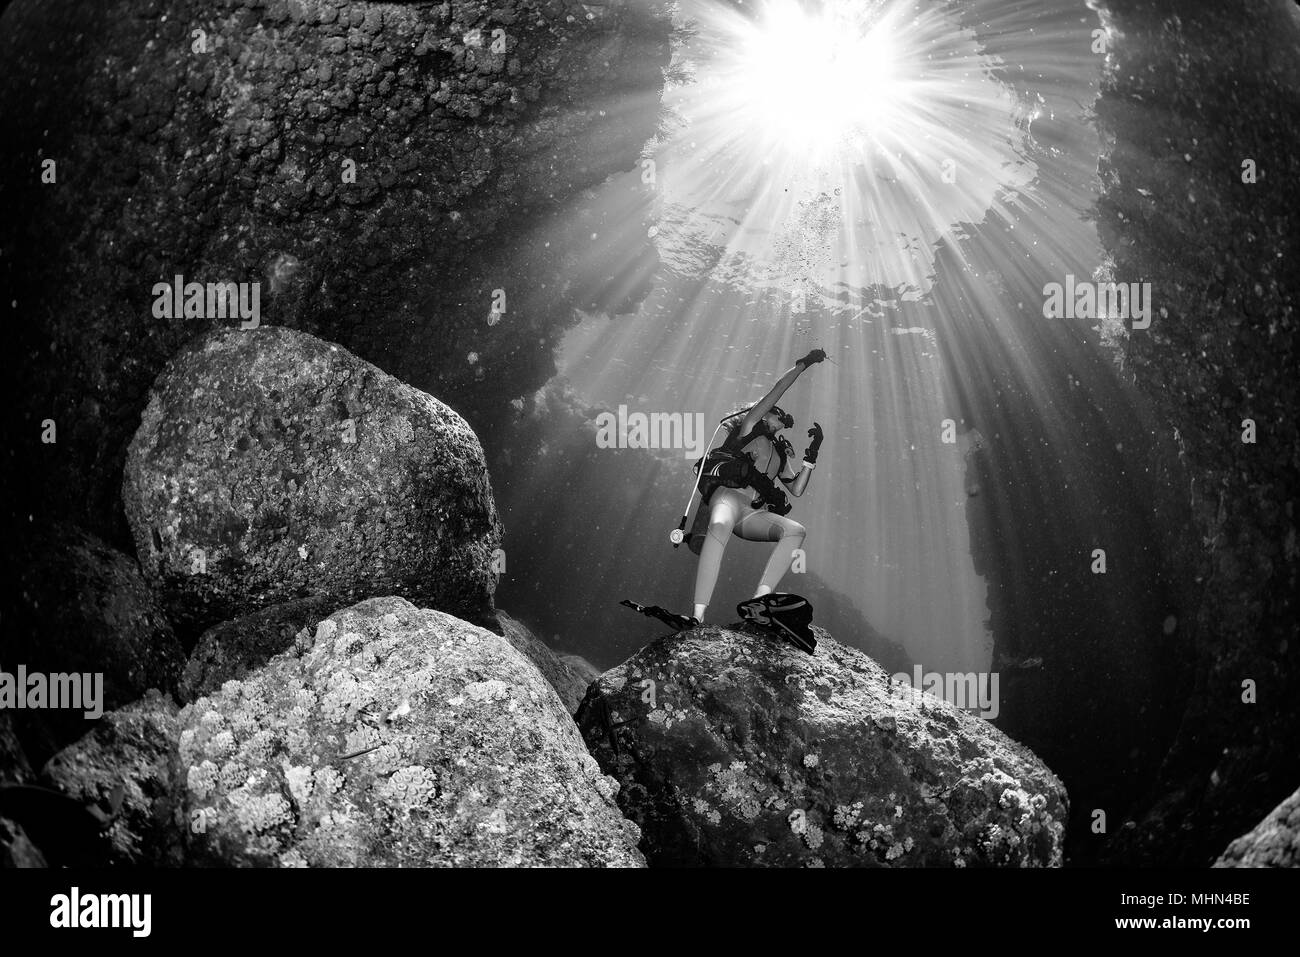 Deep ocean Black and White Stock Photos & Images - Alamy